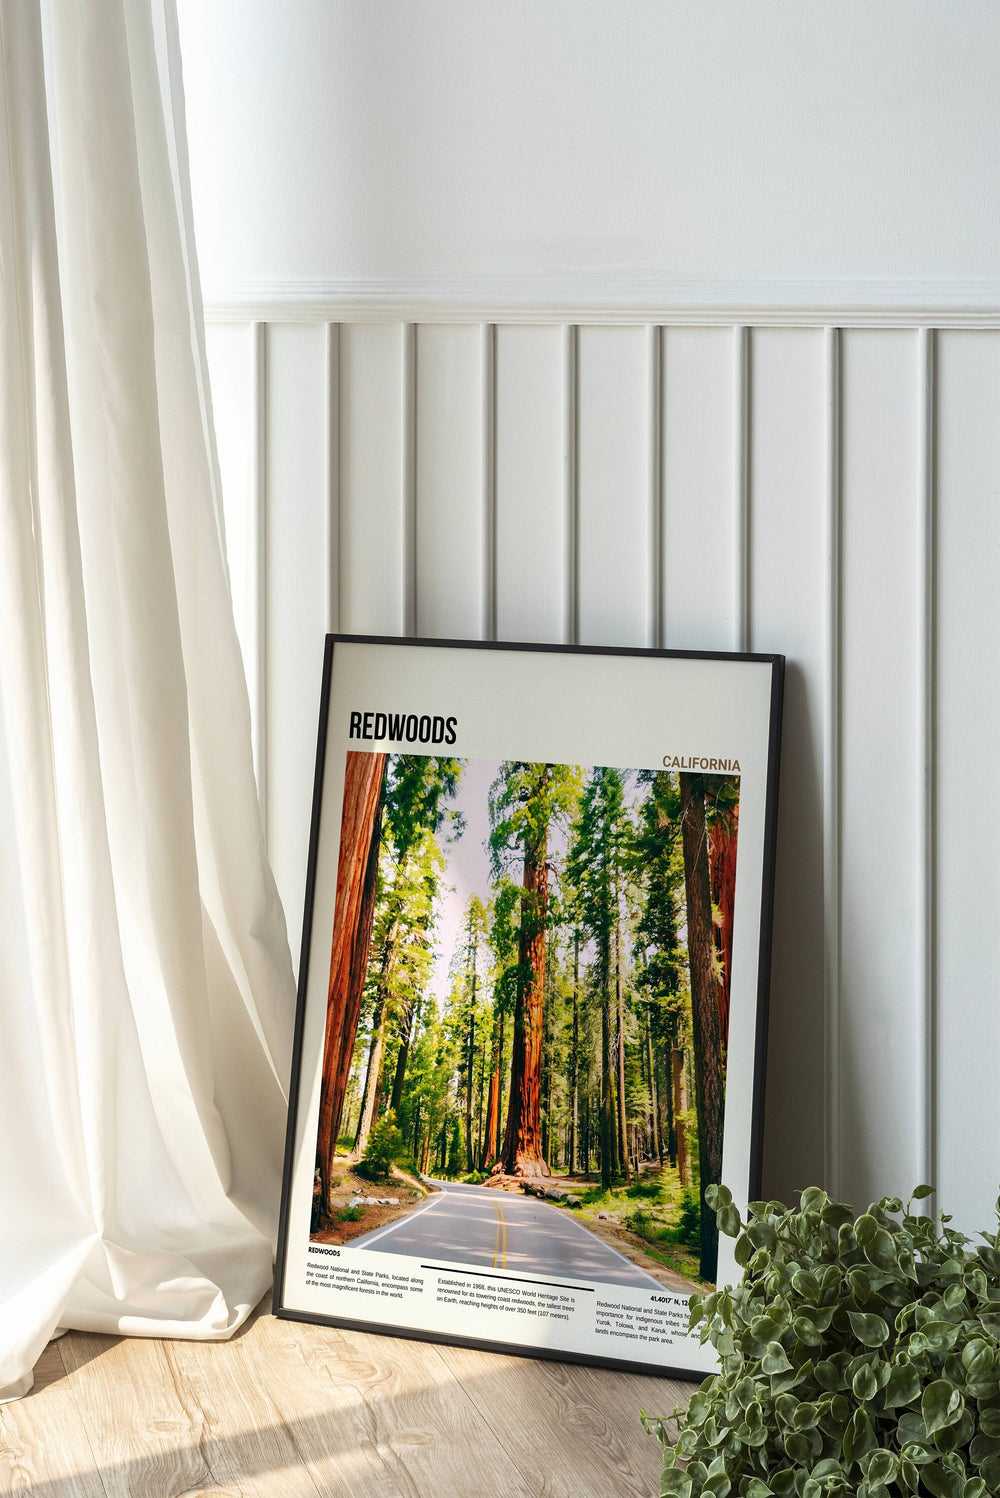 Adorn your walls with the majesty of Redwoods, a timeless addition to your home decor